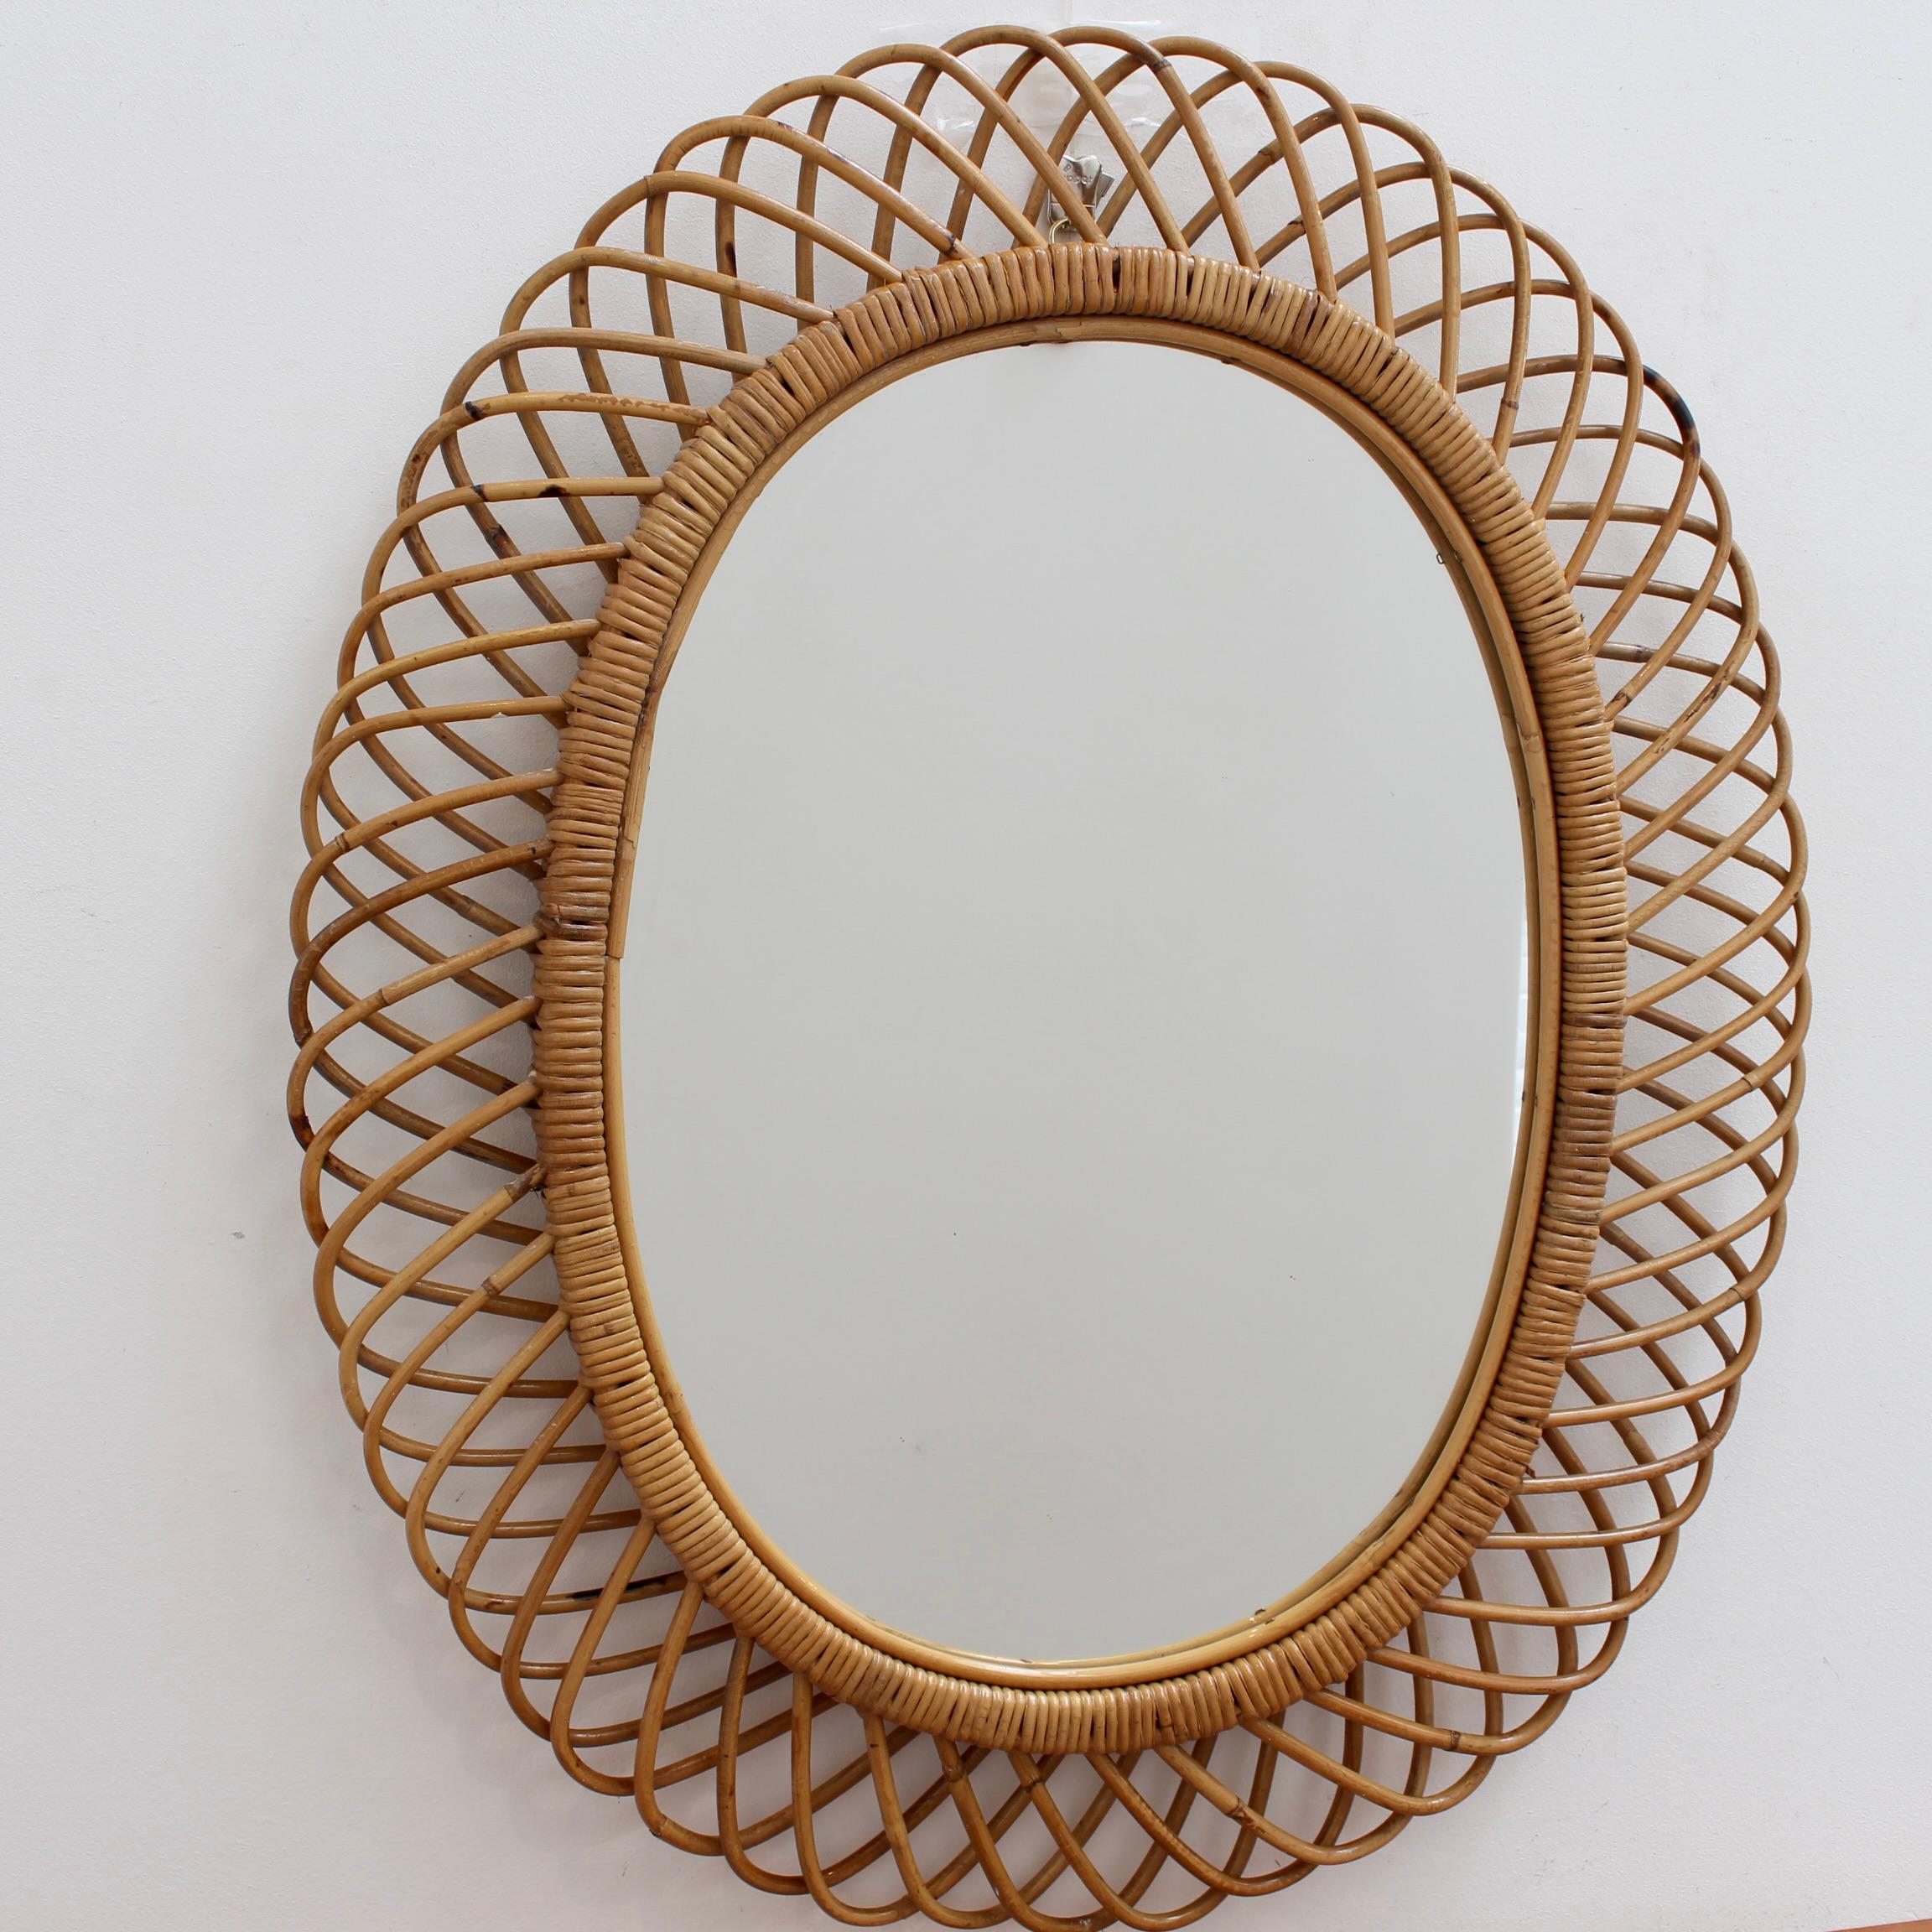 Italian rattan wall mirror (circa 1960s). This mirror has a complex weave of rattan in a continual series of horseshoe-shaped projections on the frame edge. The mirror is in overall good condition. There is a graceful, aged patina on the mirror